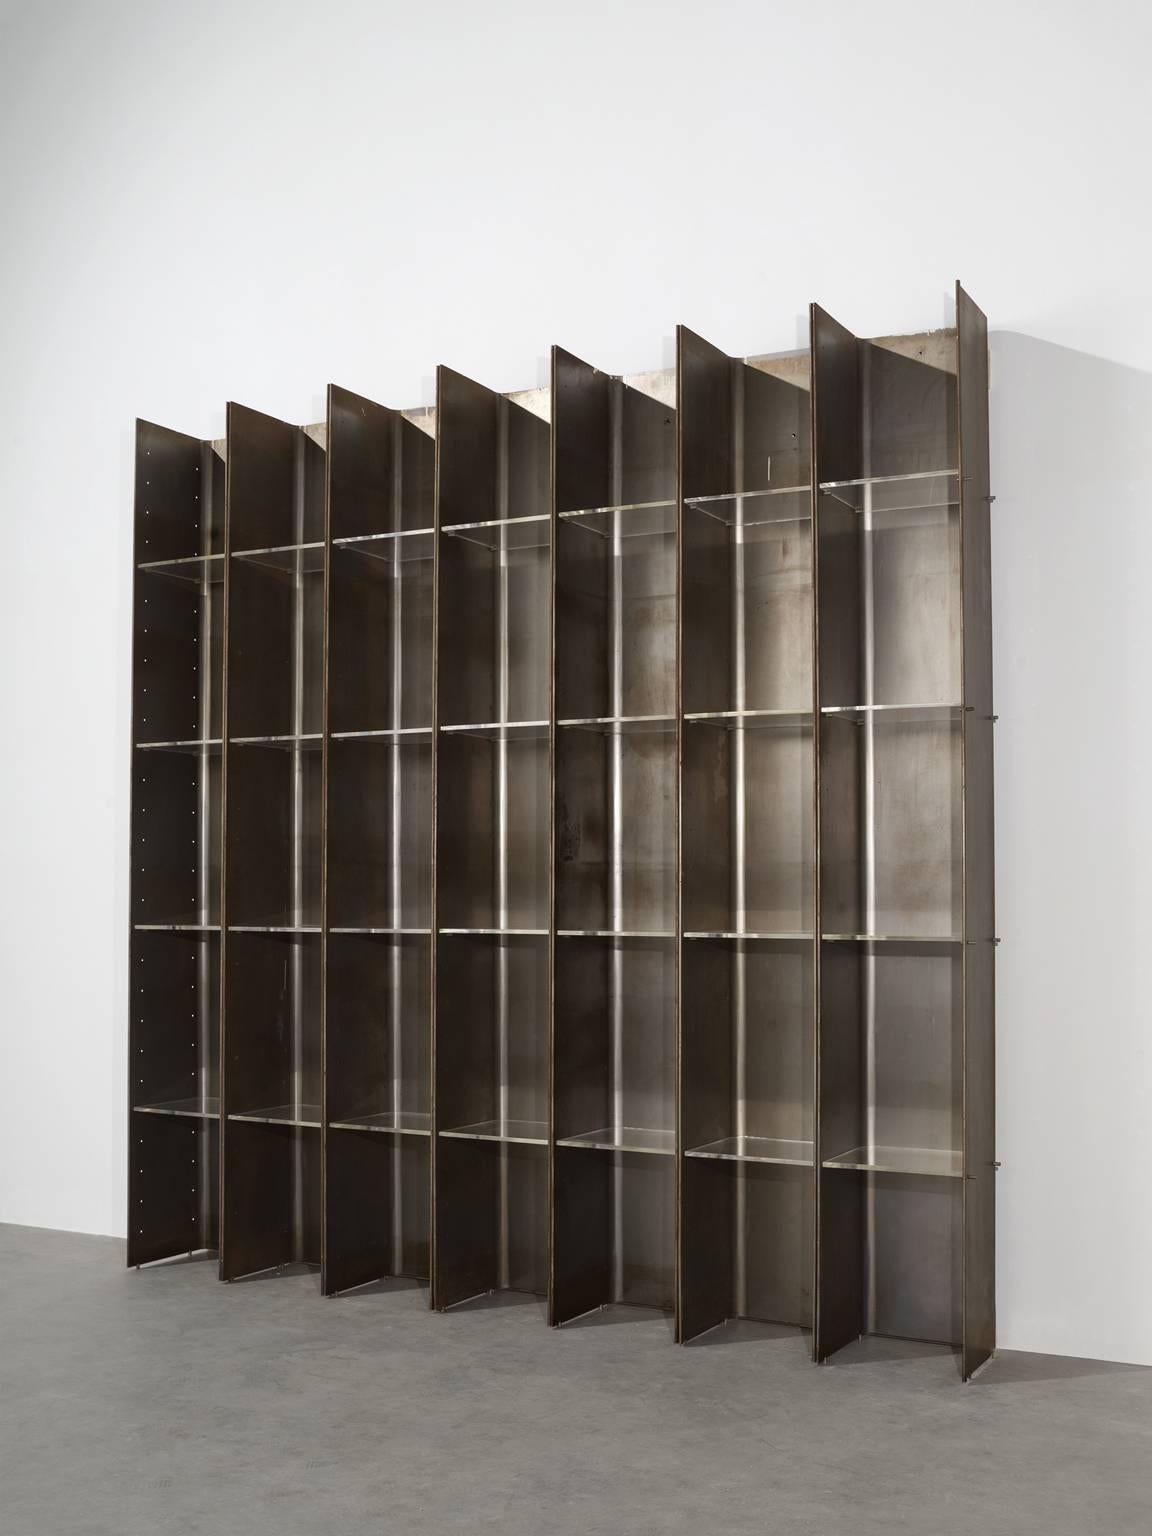 Bookcase 'Valiant', in steel and plexiglass, by Carla Venosta & Guido Zimmerman for Arflex, Italy, 1971. 

This steel bookcase with plexiglass shelves has a clean and geometric design which is emphasized by the rawness of the materials. The steel